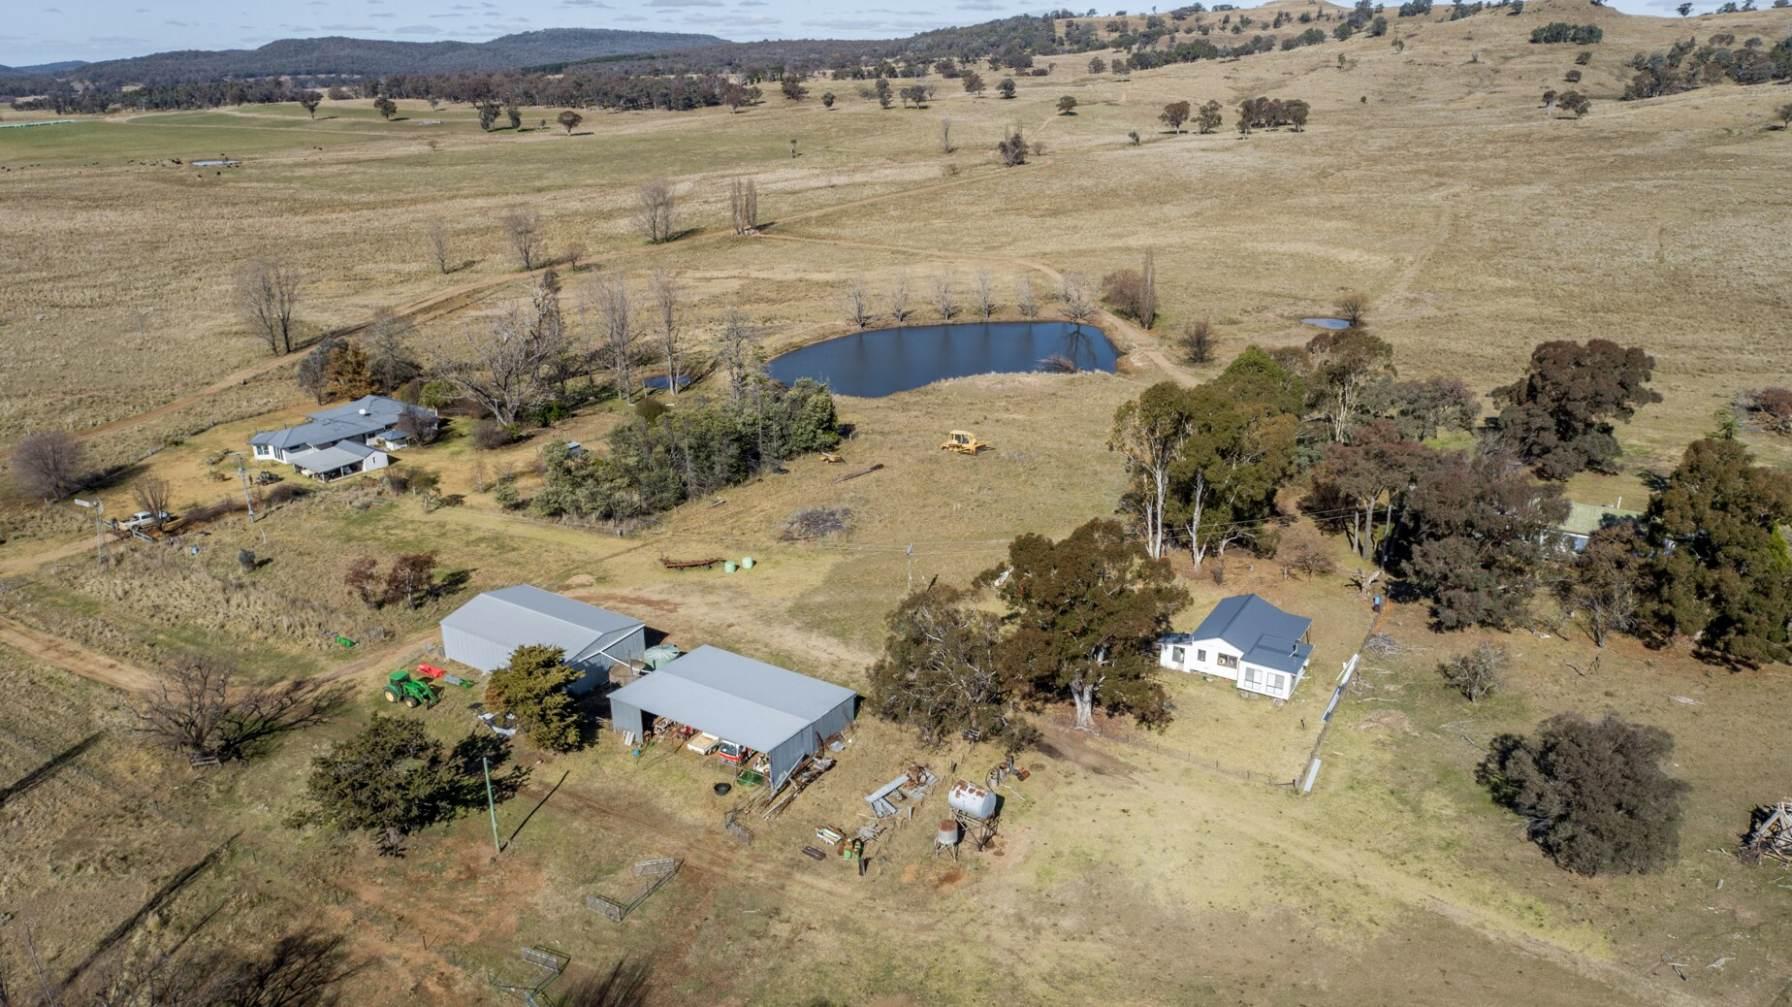 Cattle Property For Sale NSW